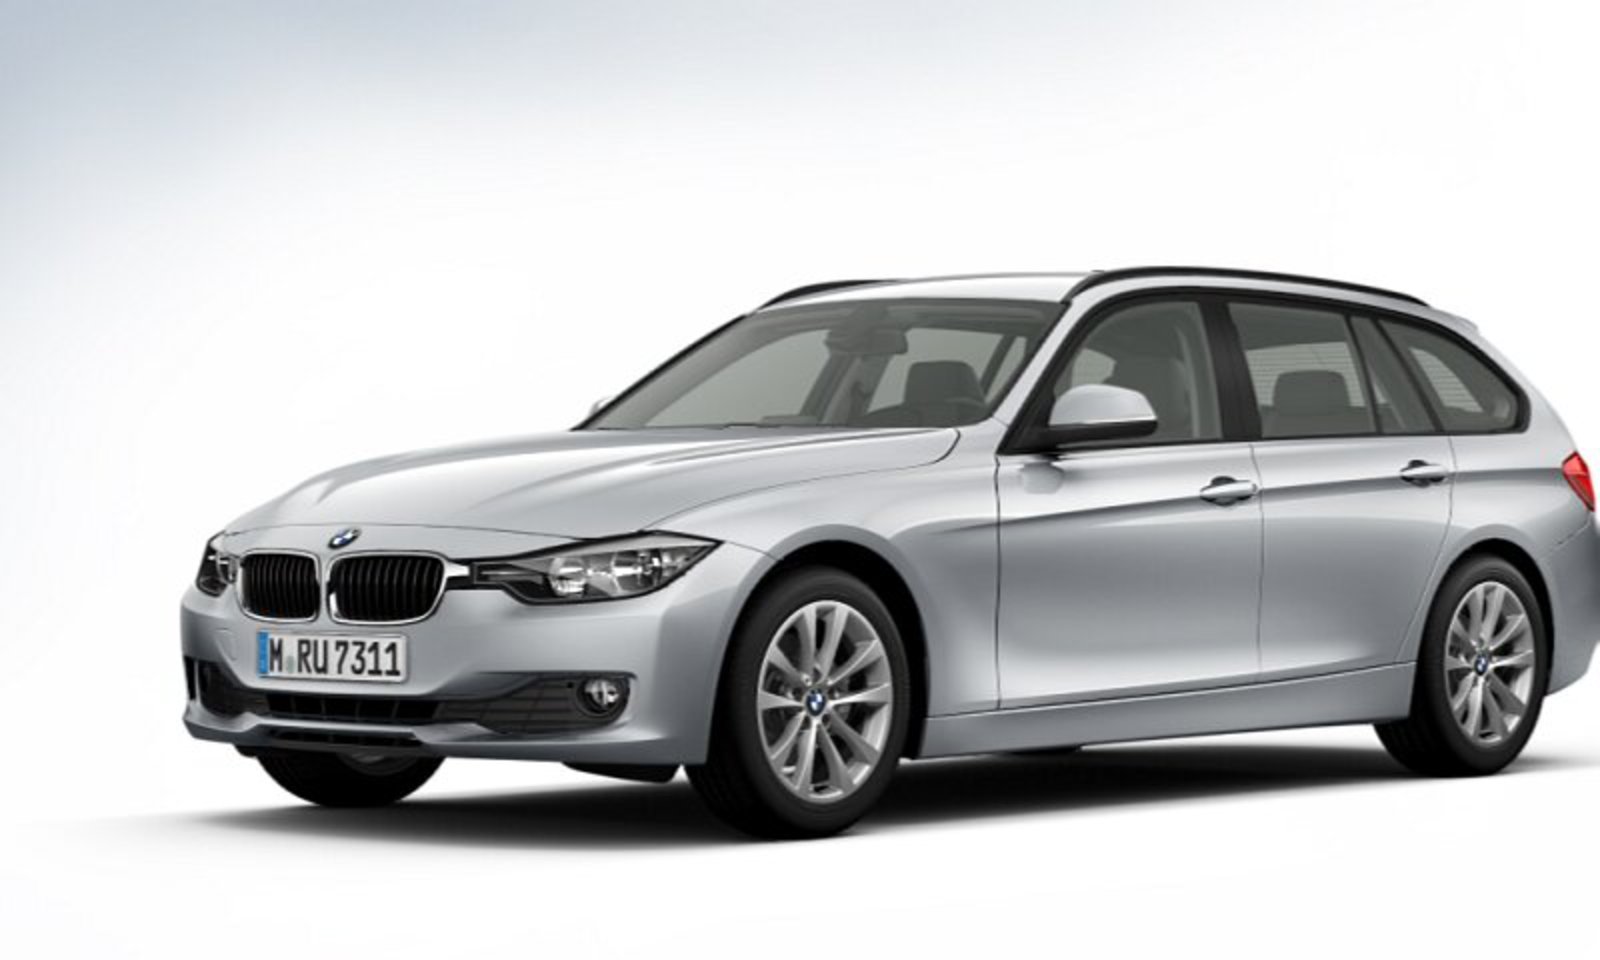 The NEW BMW 320d SE Touring from Â£293.85 + VAT